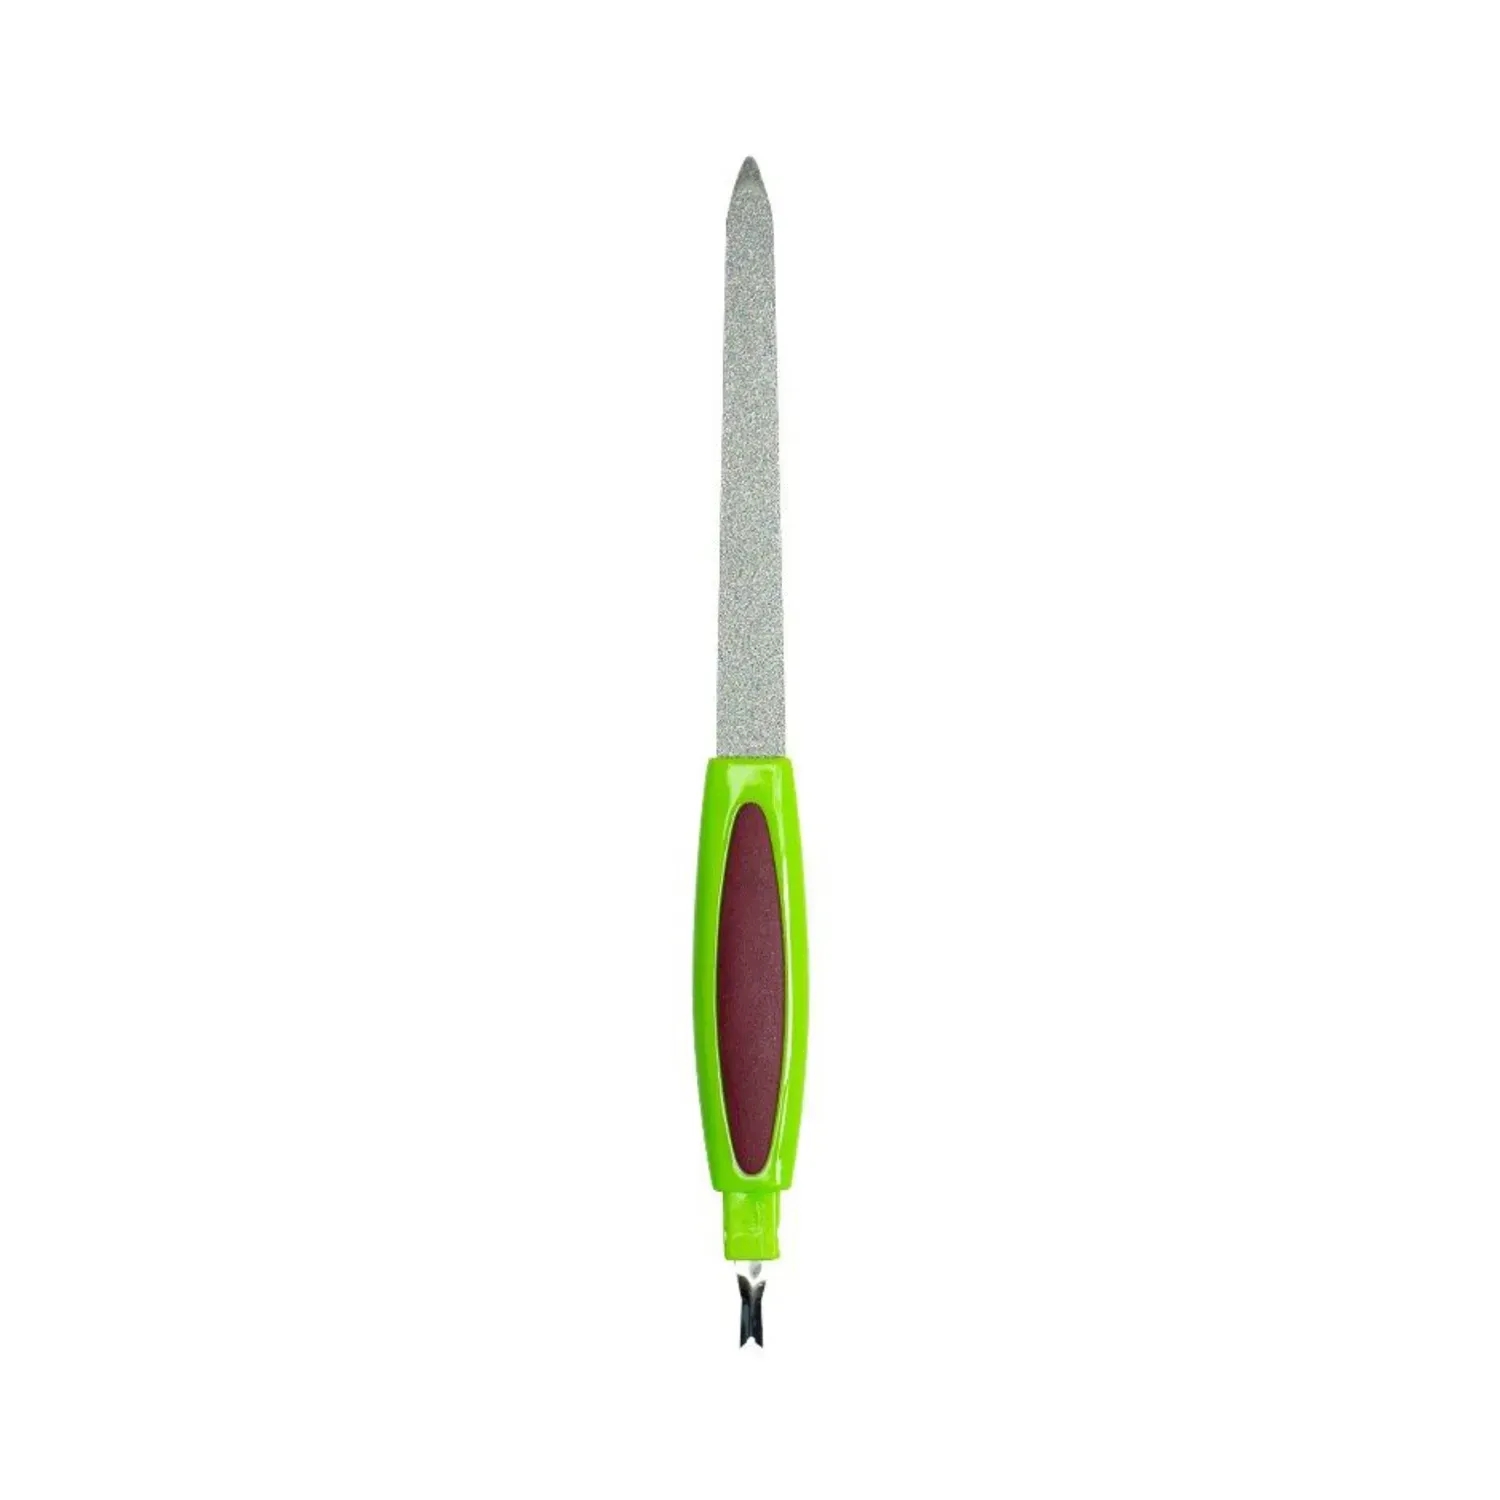 Bronson Professional | Bronson Professional Nail Filer and Cuticle Trimmer (1Pc)